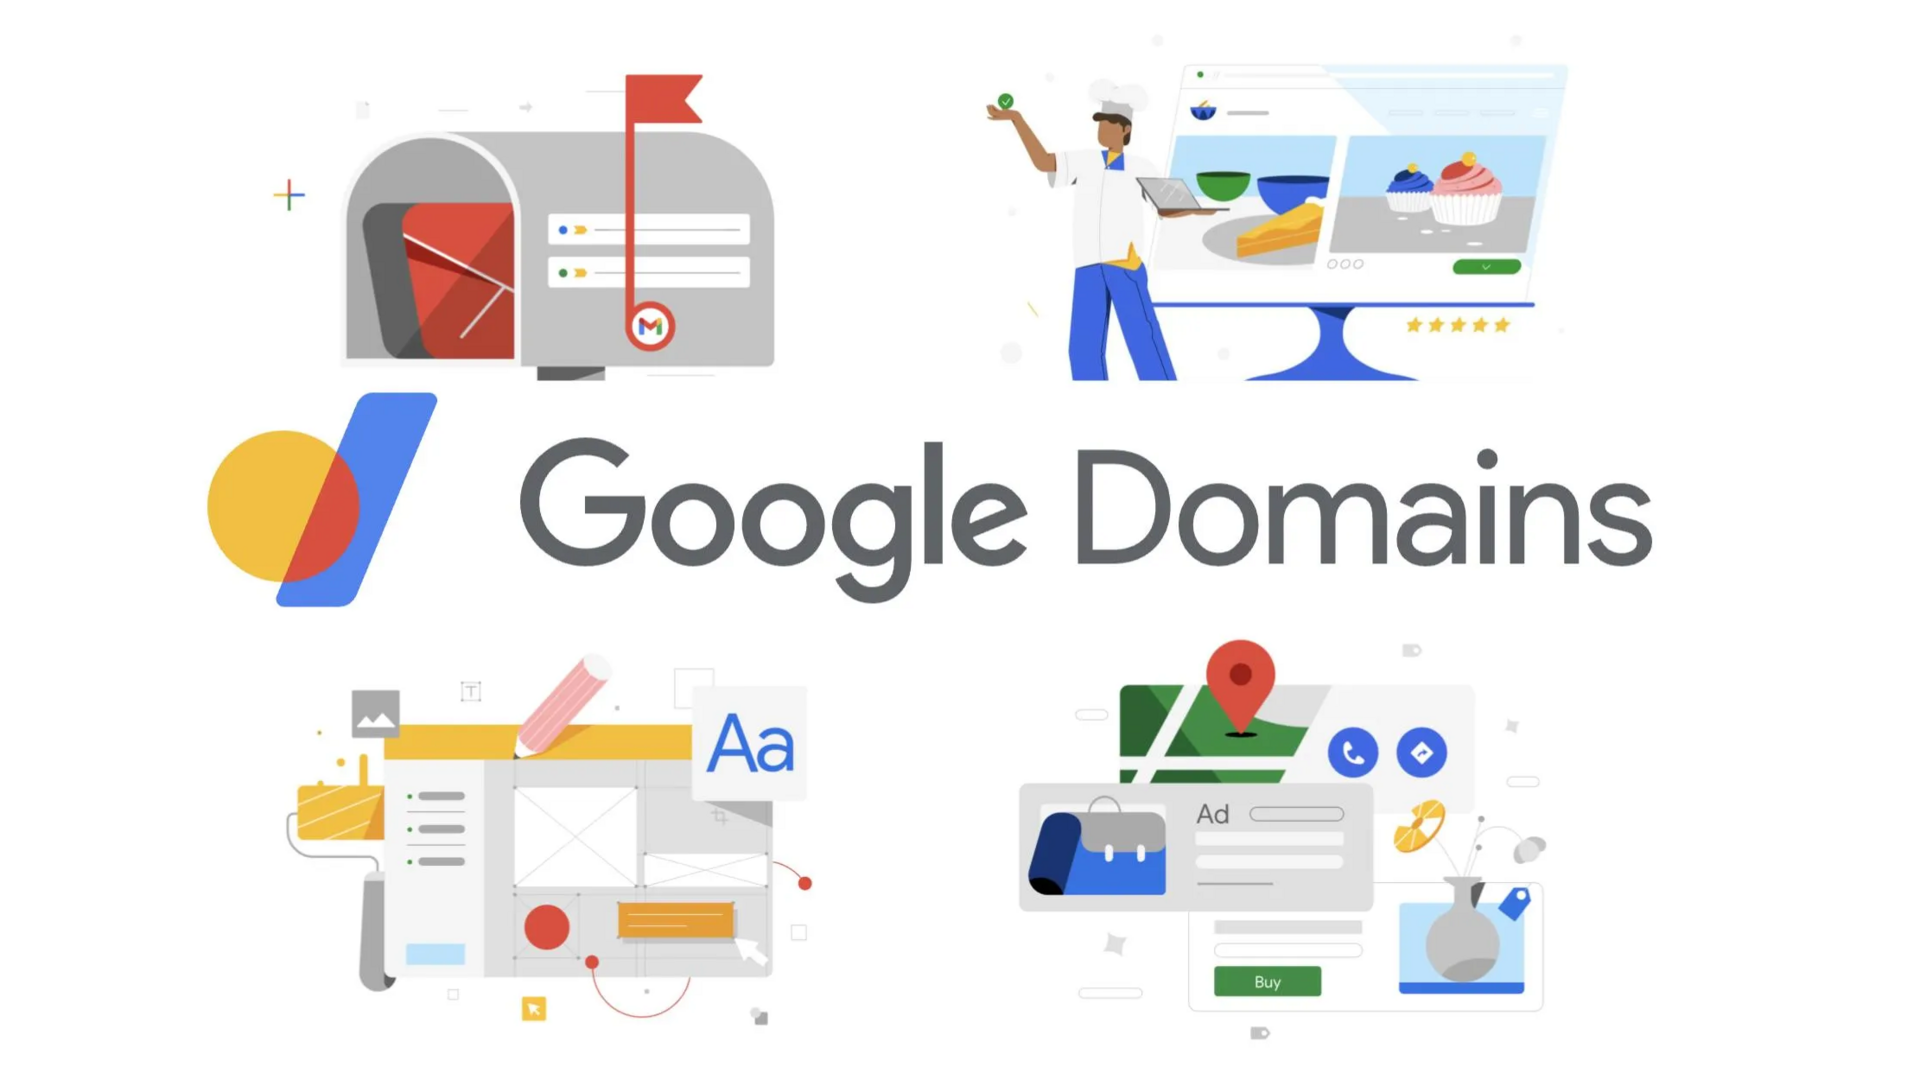 Google Domains stops selling domains; asks users to try Squarespace